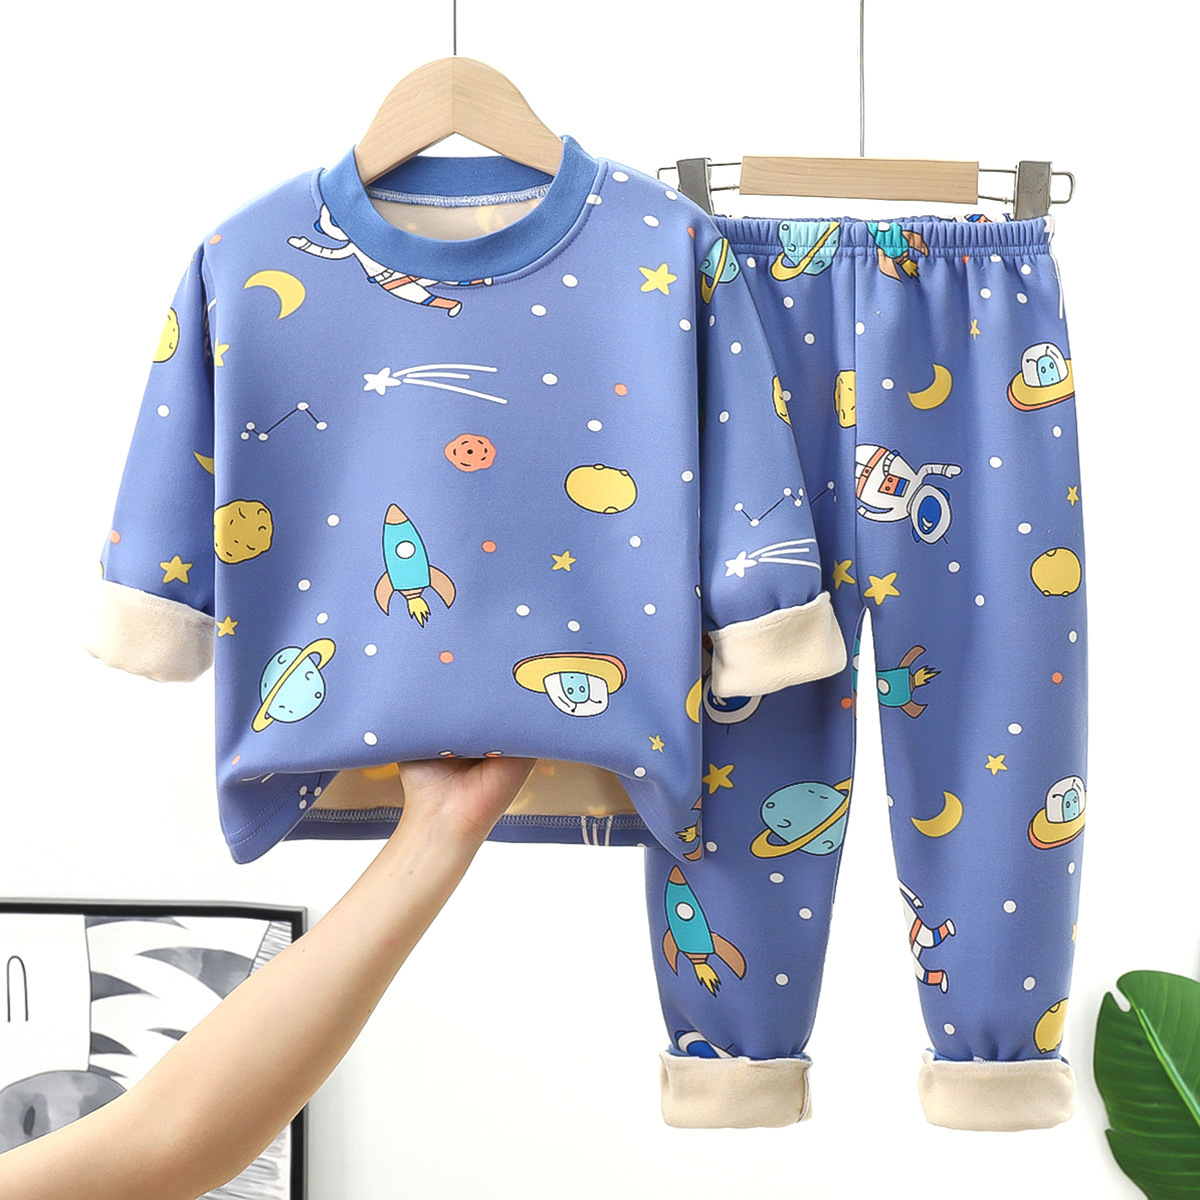 Children's Thermal Underwear Set Men's Middle Children's and Girls' Fleece-Lined Thickened Autumn Clothes Autumn Trousers Baby's Pajamas Infants' Children's Clothing